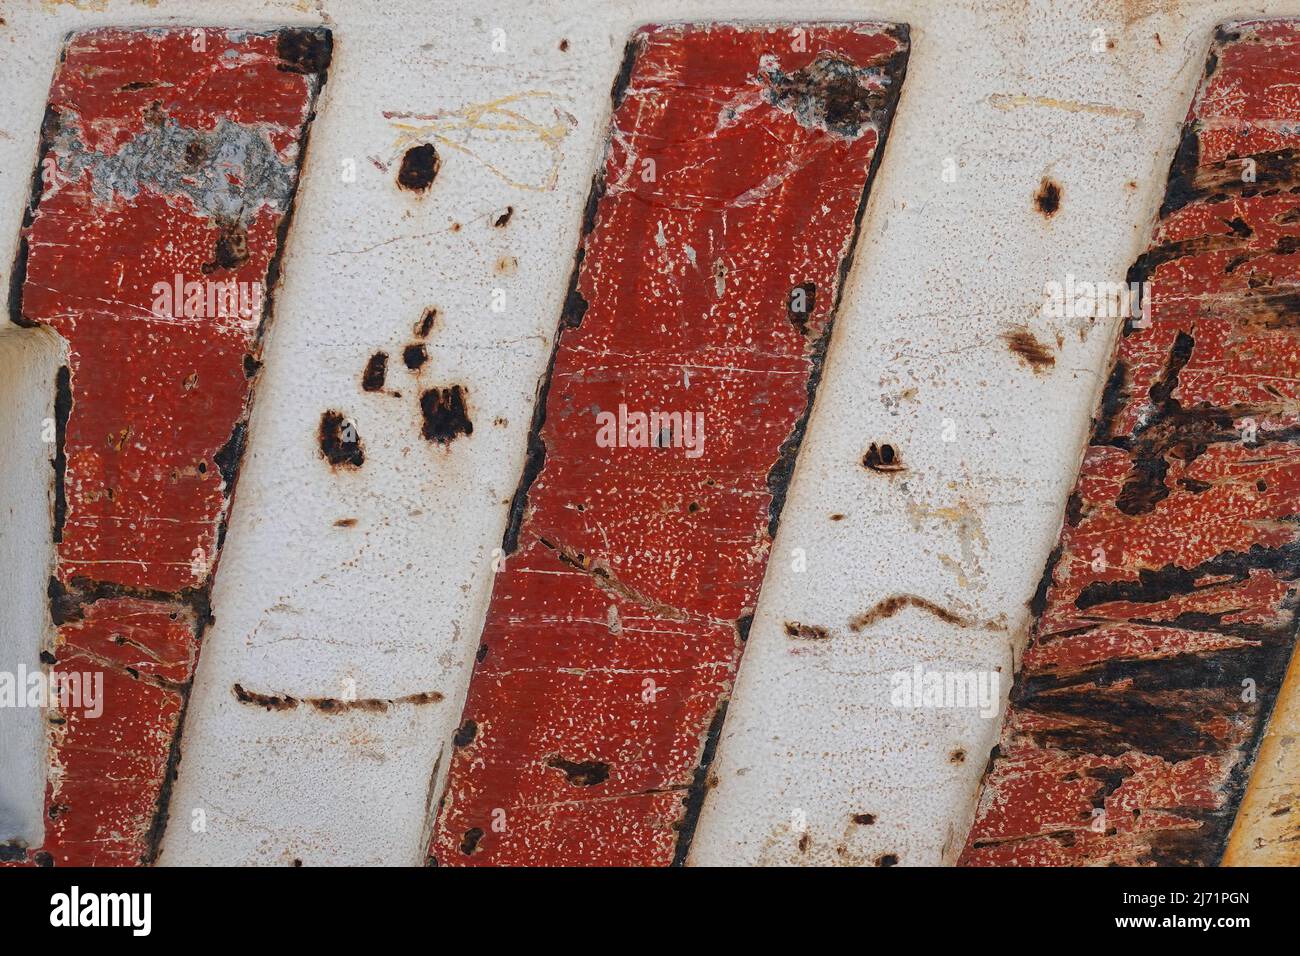 Rusty metal texture with red stripes. Abstract background. Stock Photo